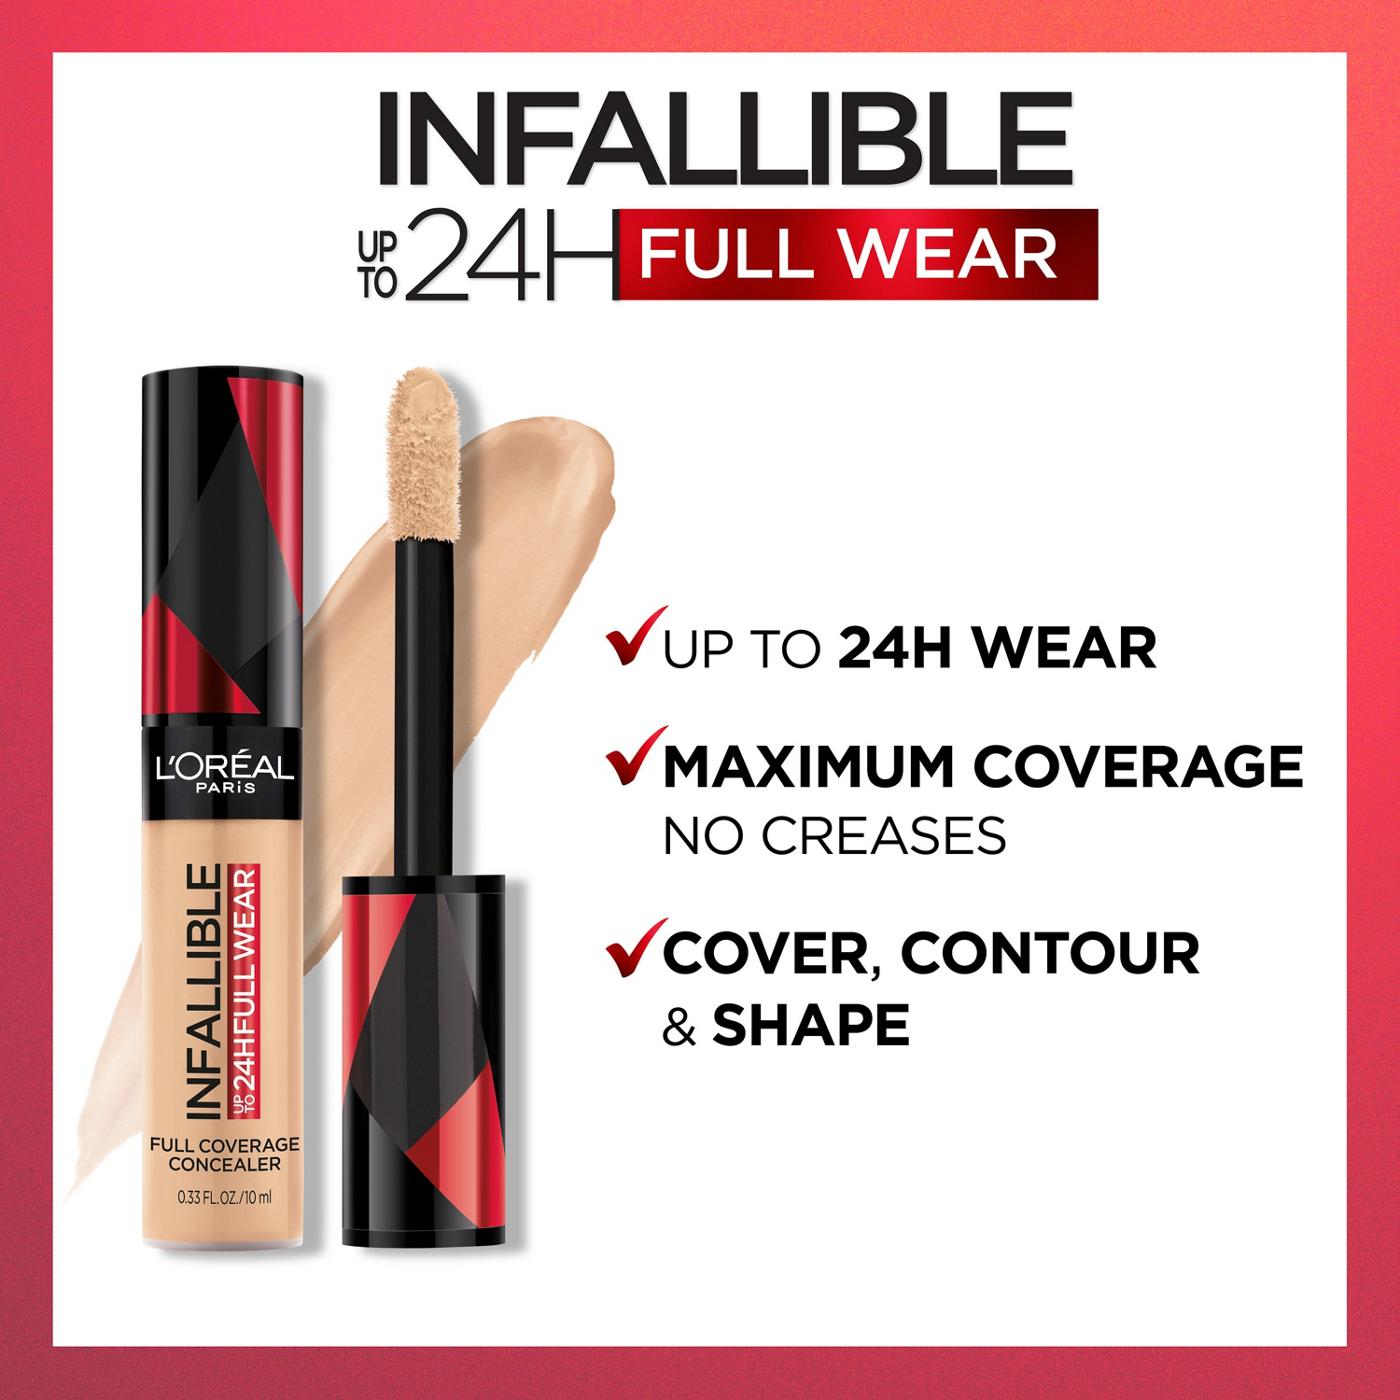 L'Oréal Paris Infallible Full Wear Concealer up to 24H Full Coverage Oatmeal; image 2 of 7